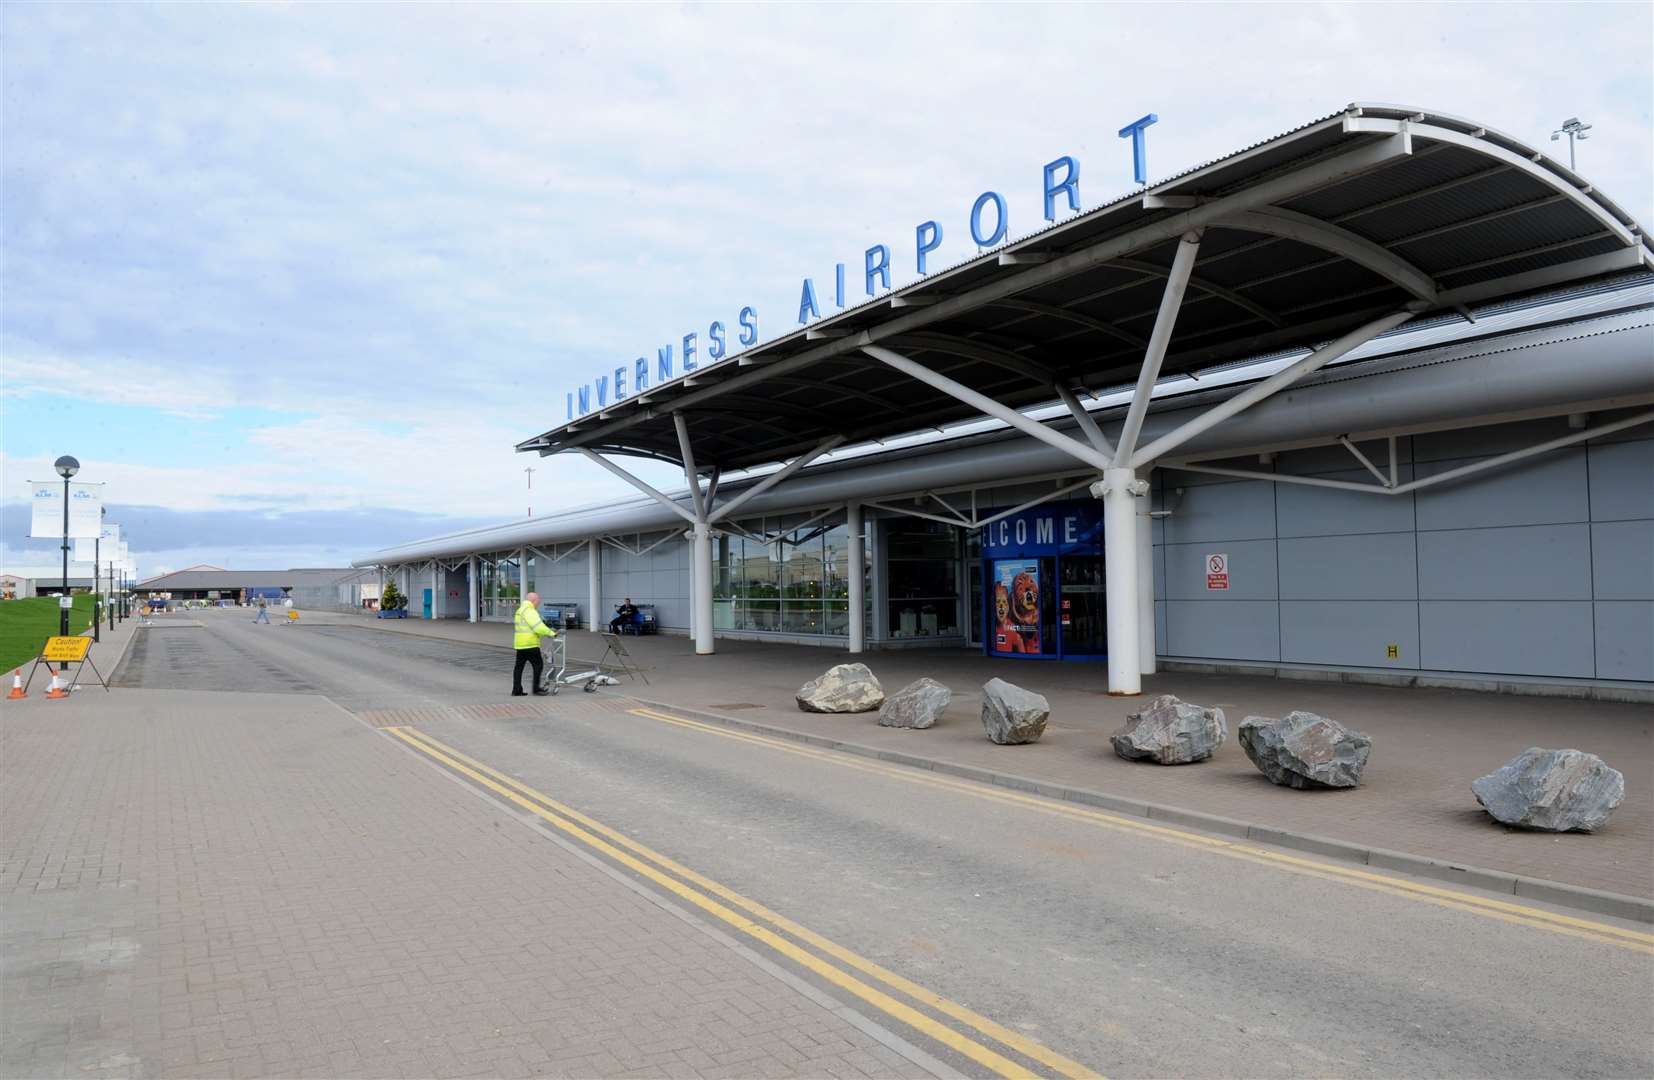 Transport leaders say air connectivity is essential for vital services and the economy of the Highlands and Islands.